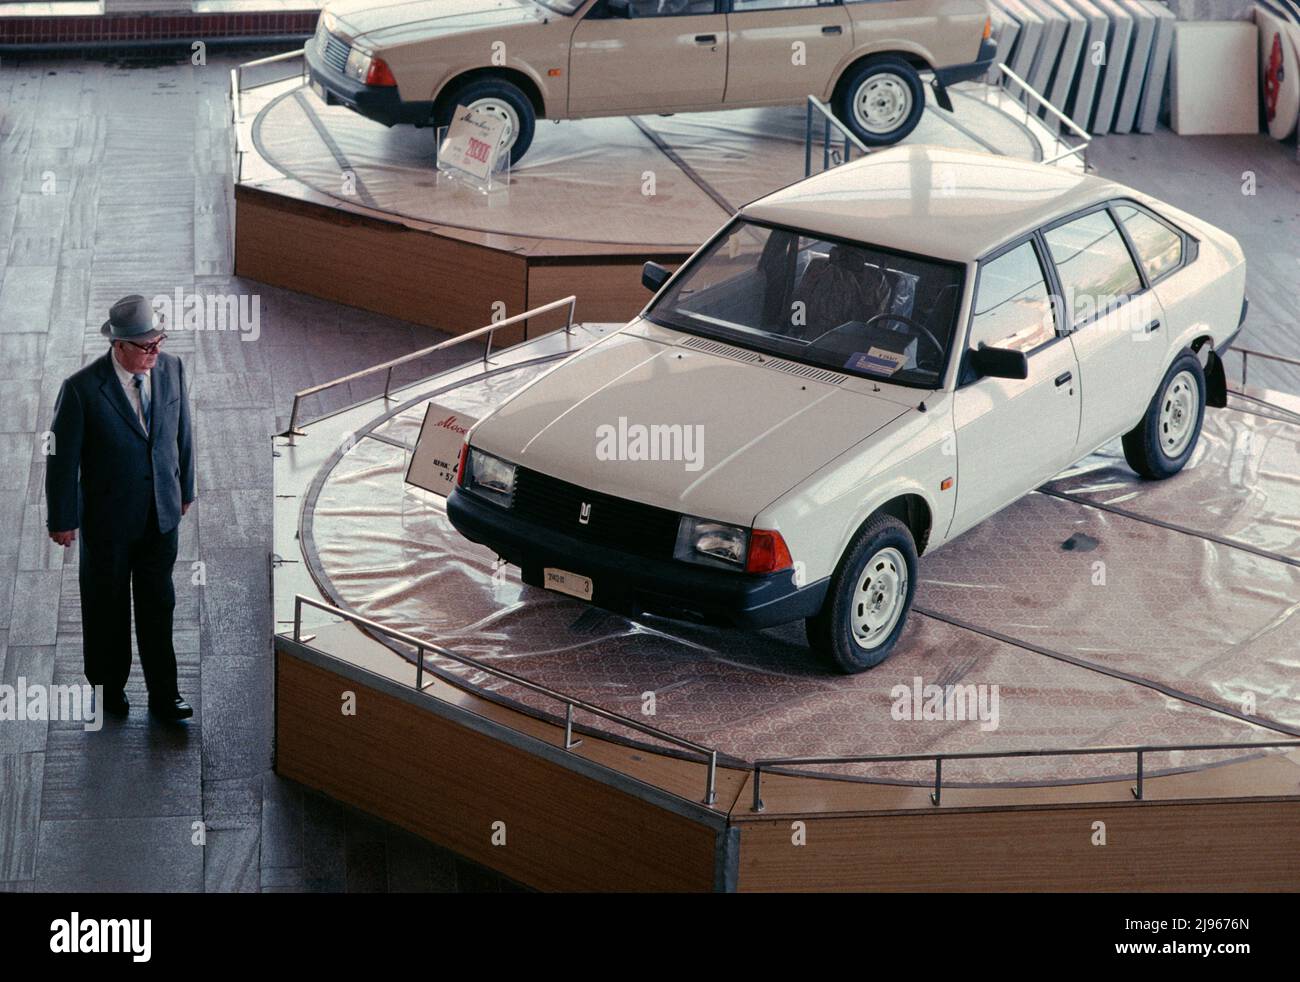 Moscow Auto showroom during the last months of the Soviet Union.  A man looks at the new Soviet Moskvitch-2141, known as the Aleko.  The front wheel drive 2141 was created by both Russian and French designers and produced in the Moskvitch Moscow factory from 1986 until 1997.   Photo date 16/05/1991. Stock Photo